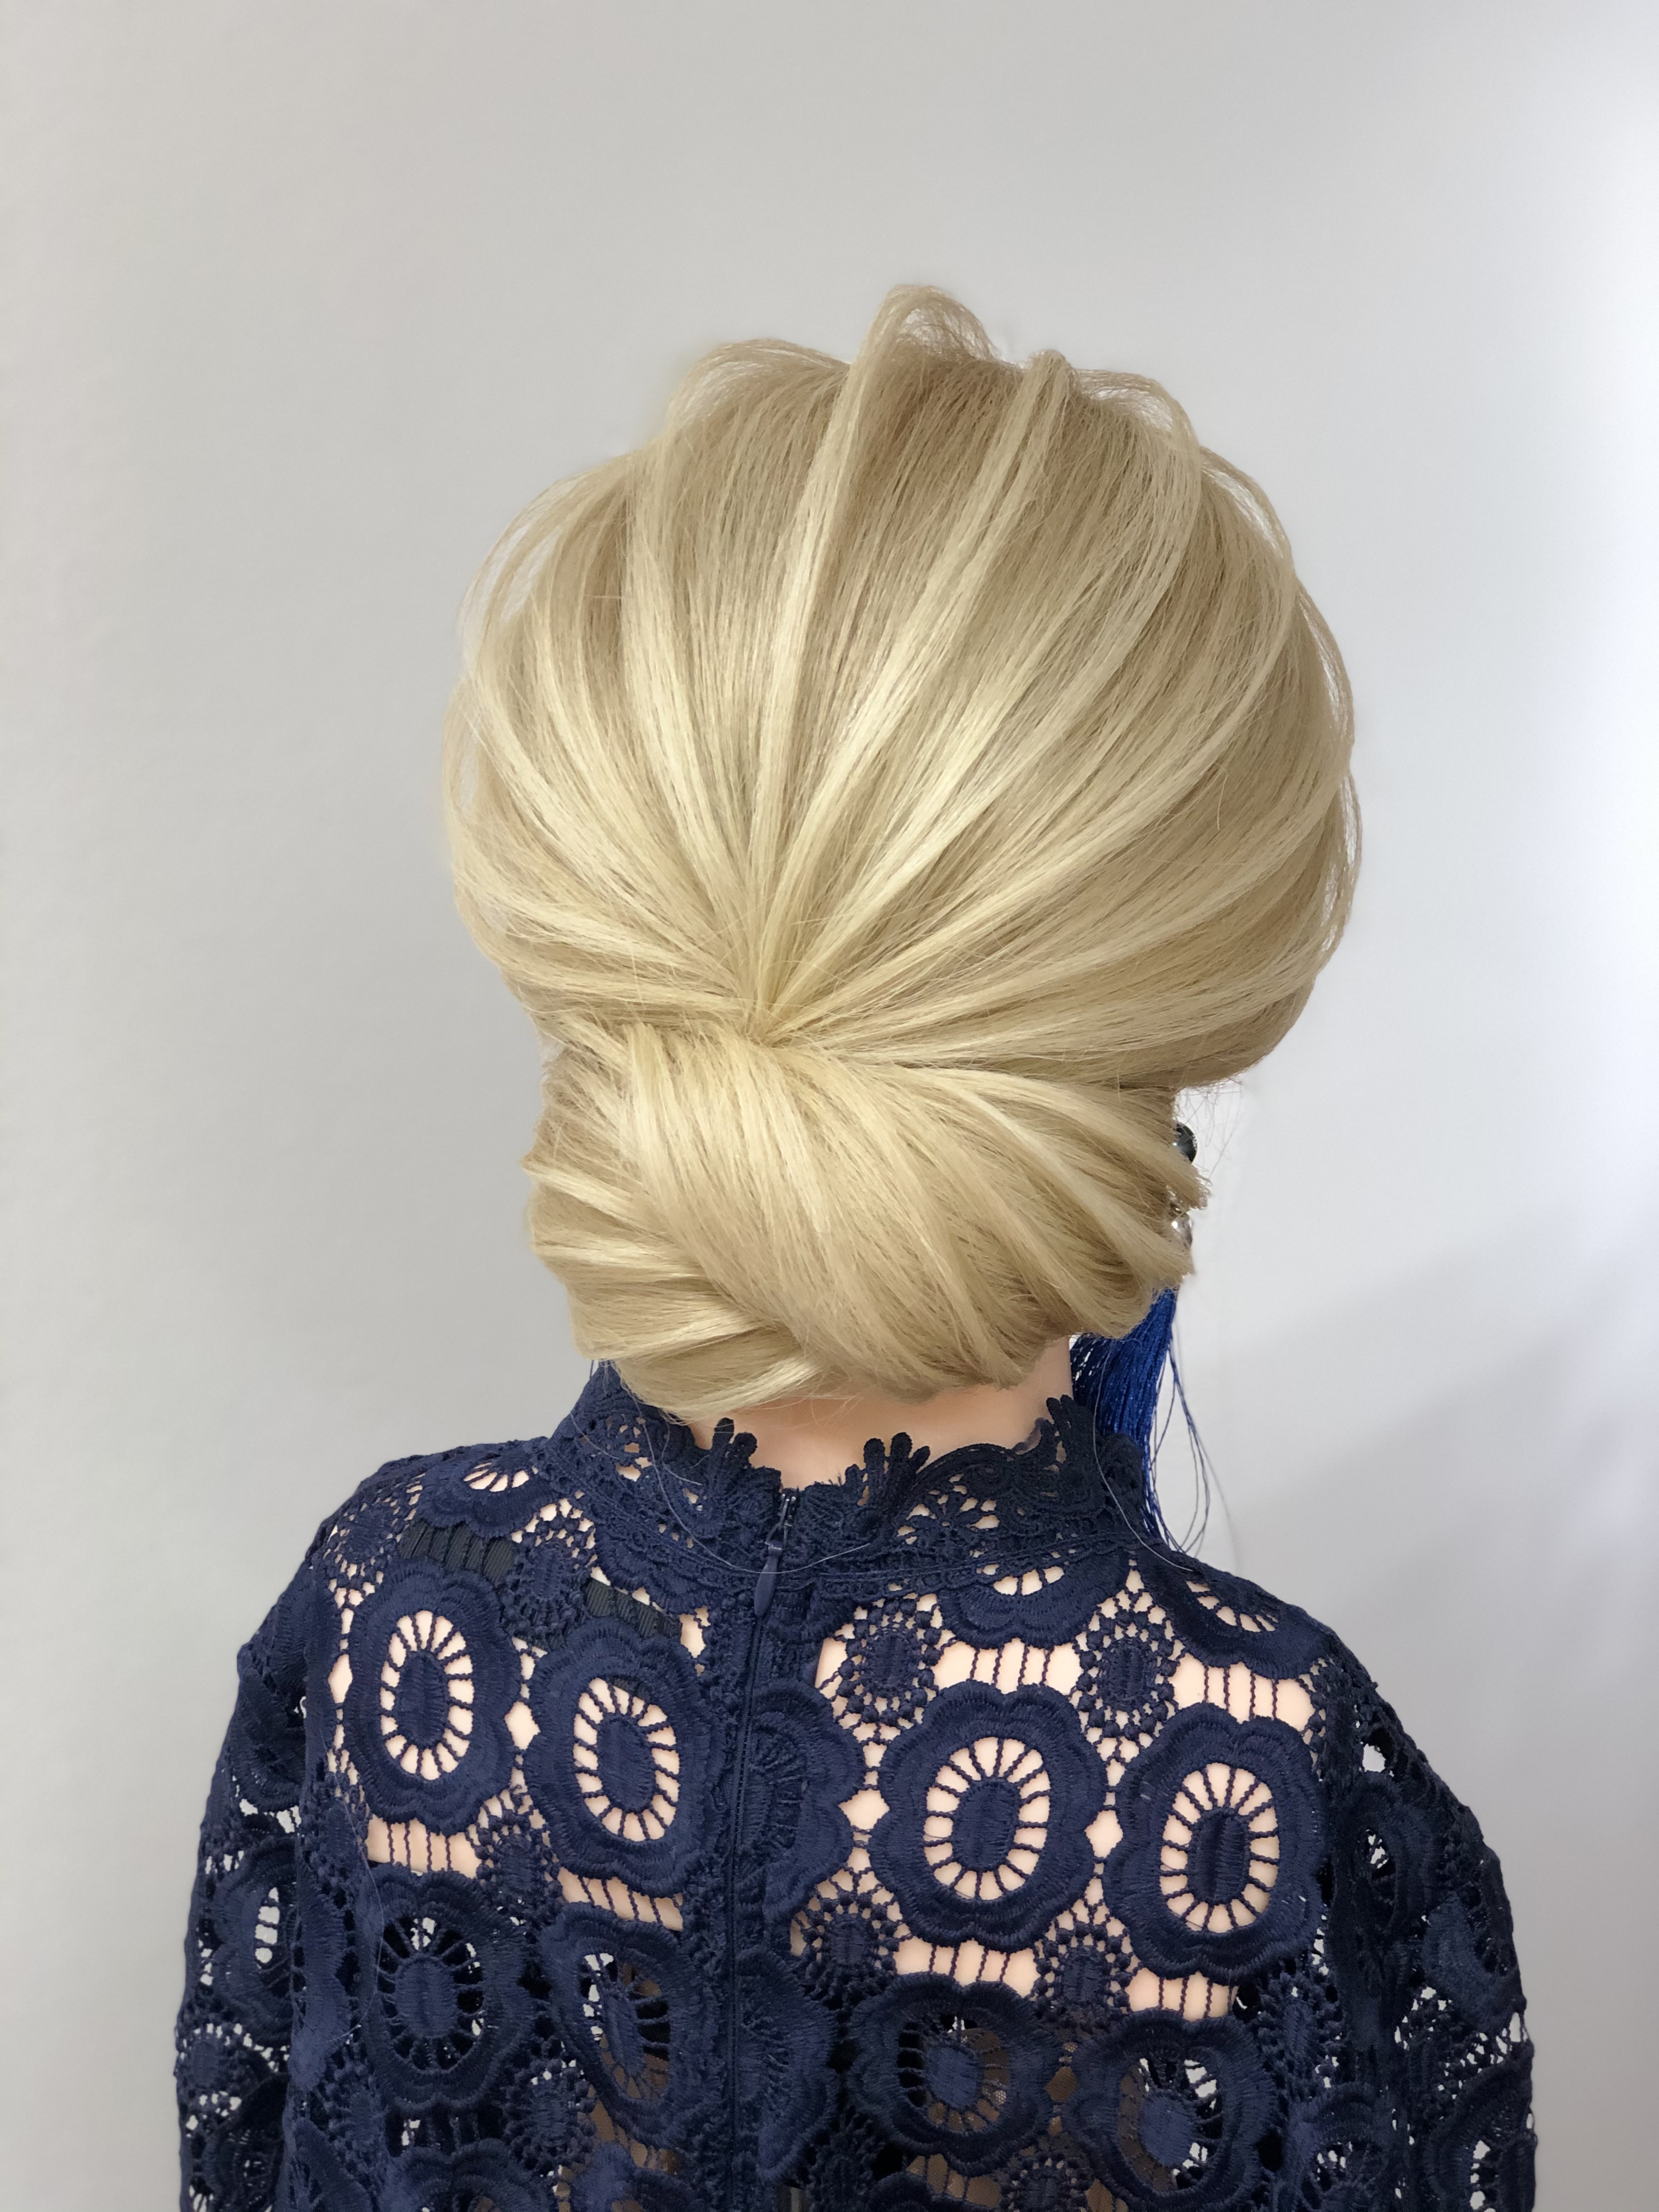 Evening hairstyle<br><span color-type="color" style="color: #cfa569;">2 000 - 3000 kron</span>